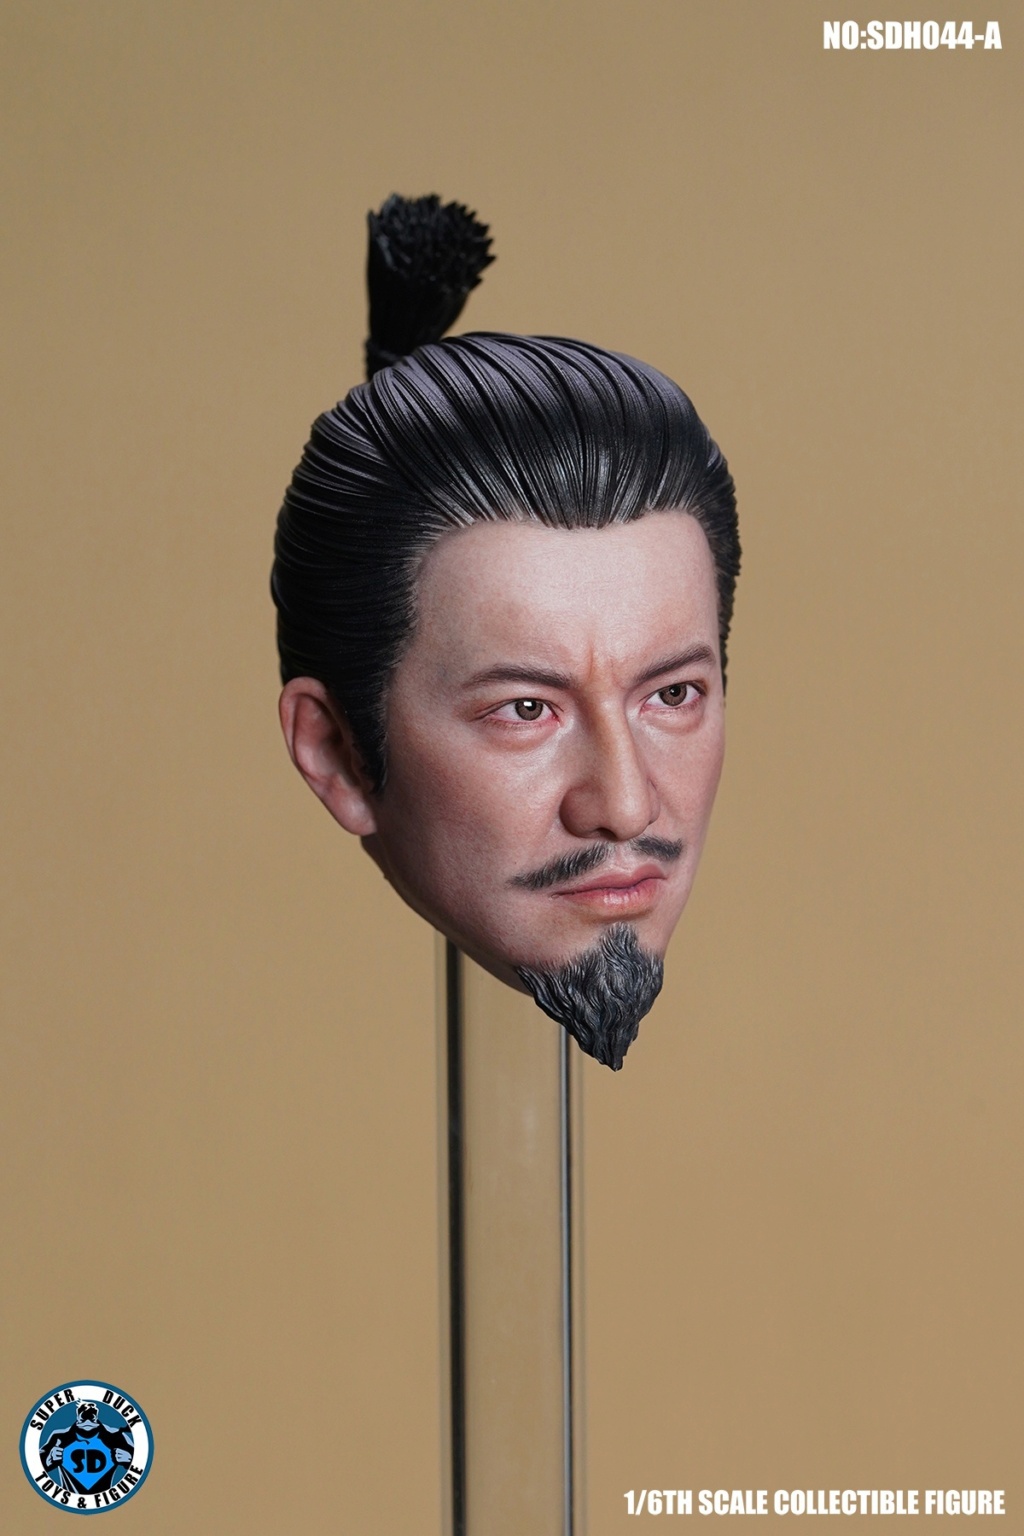 superduck - NEW PRODUCT: Super Duck: 1/6 Japanese samurai head carving (SDH044-A version without neck, SDH044-B version with neck) 21225012